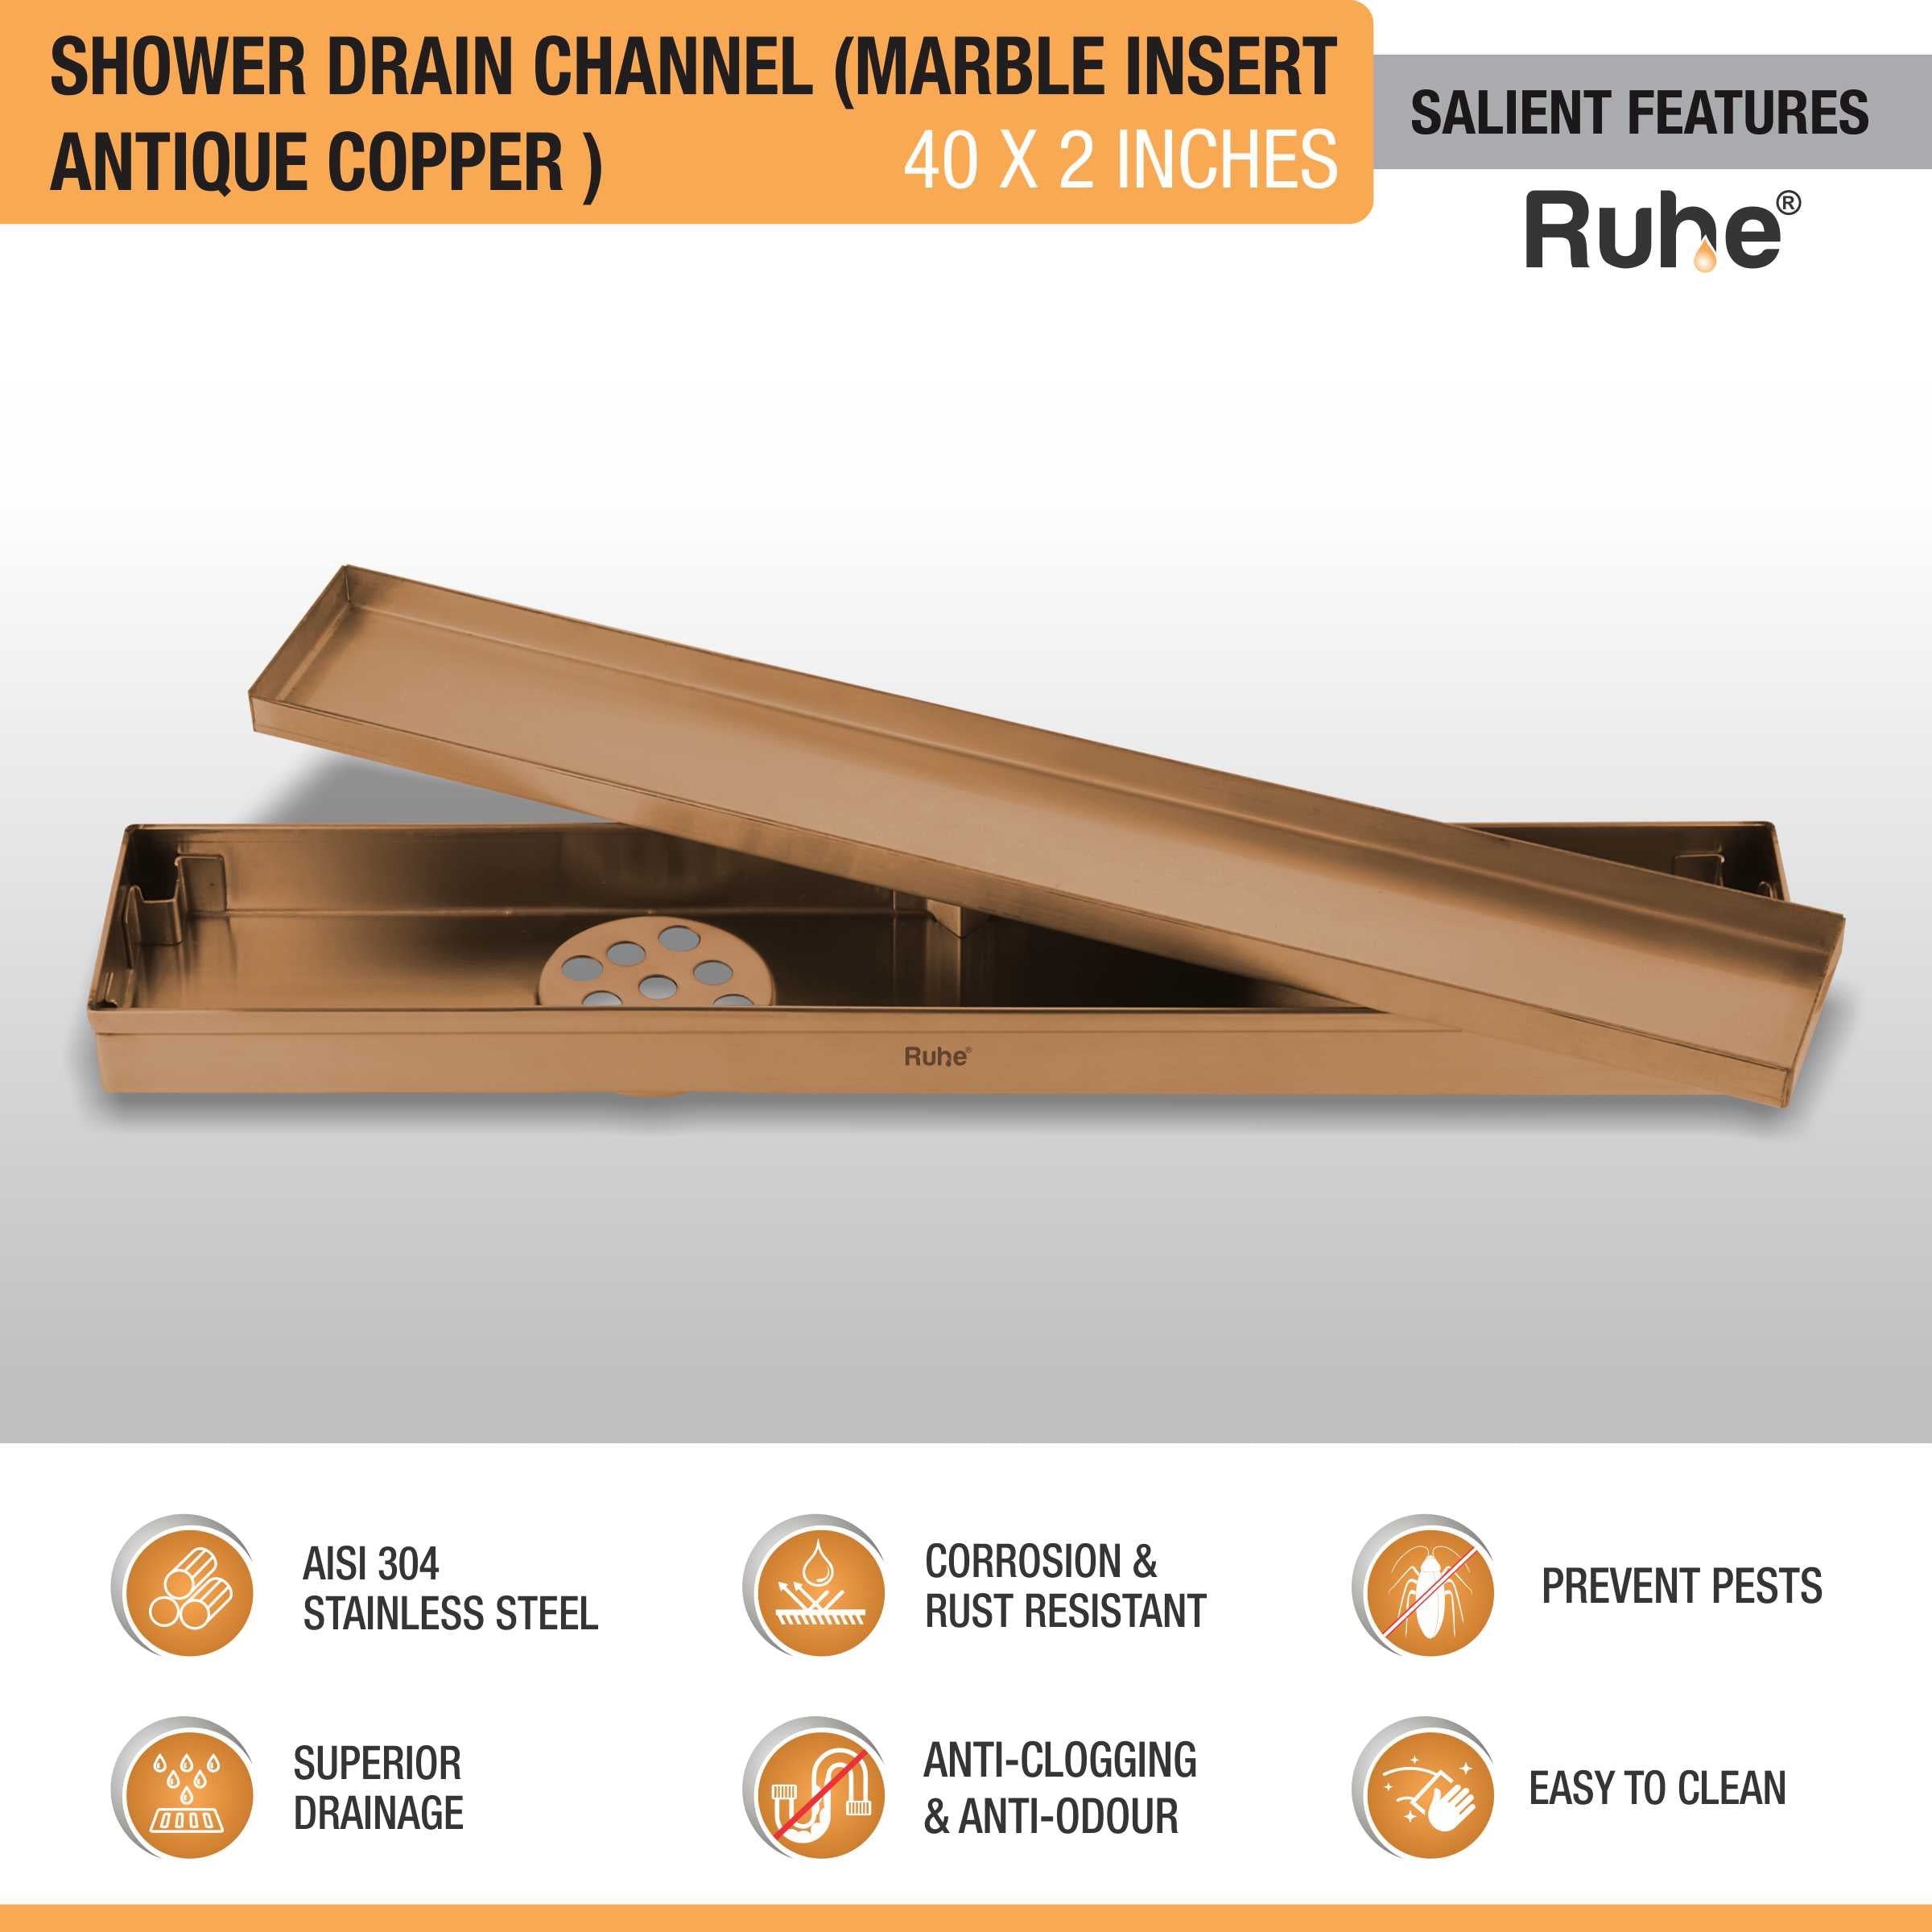 Marble Insert Shower Drain Channel (40 x 2 Inches) ANTIQUE COPPER features